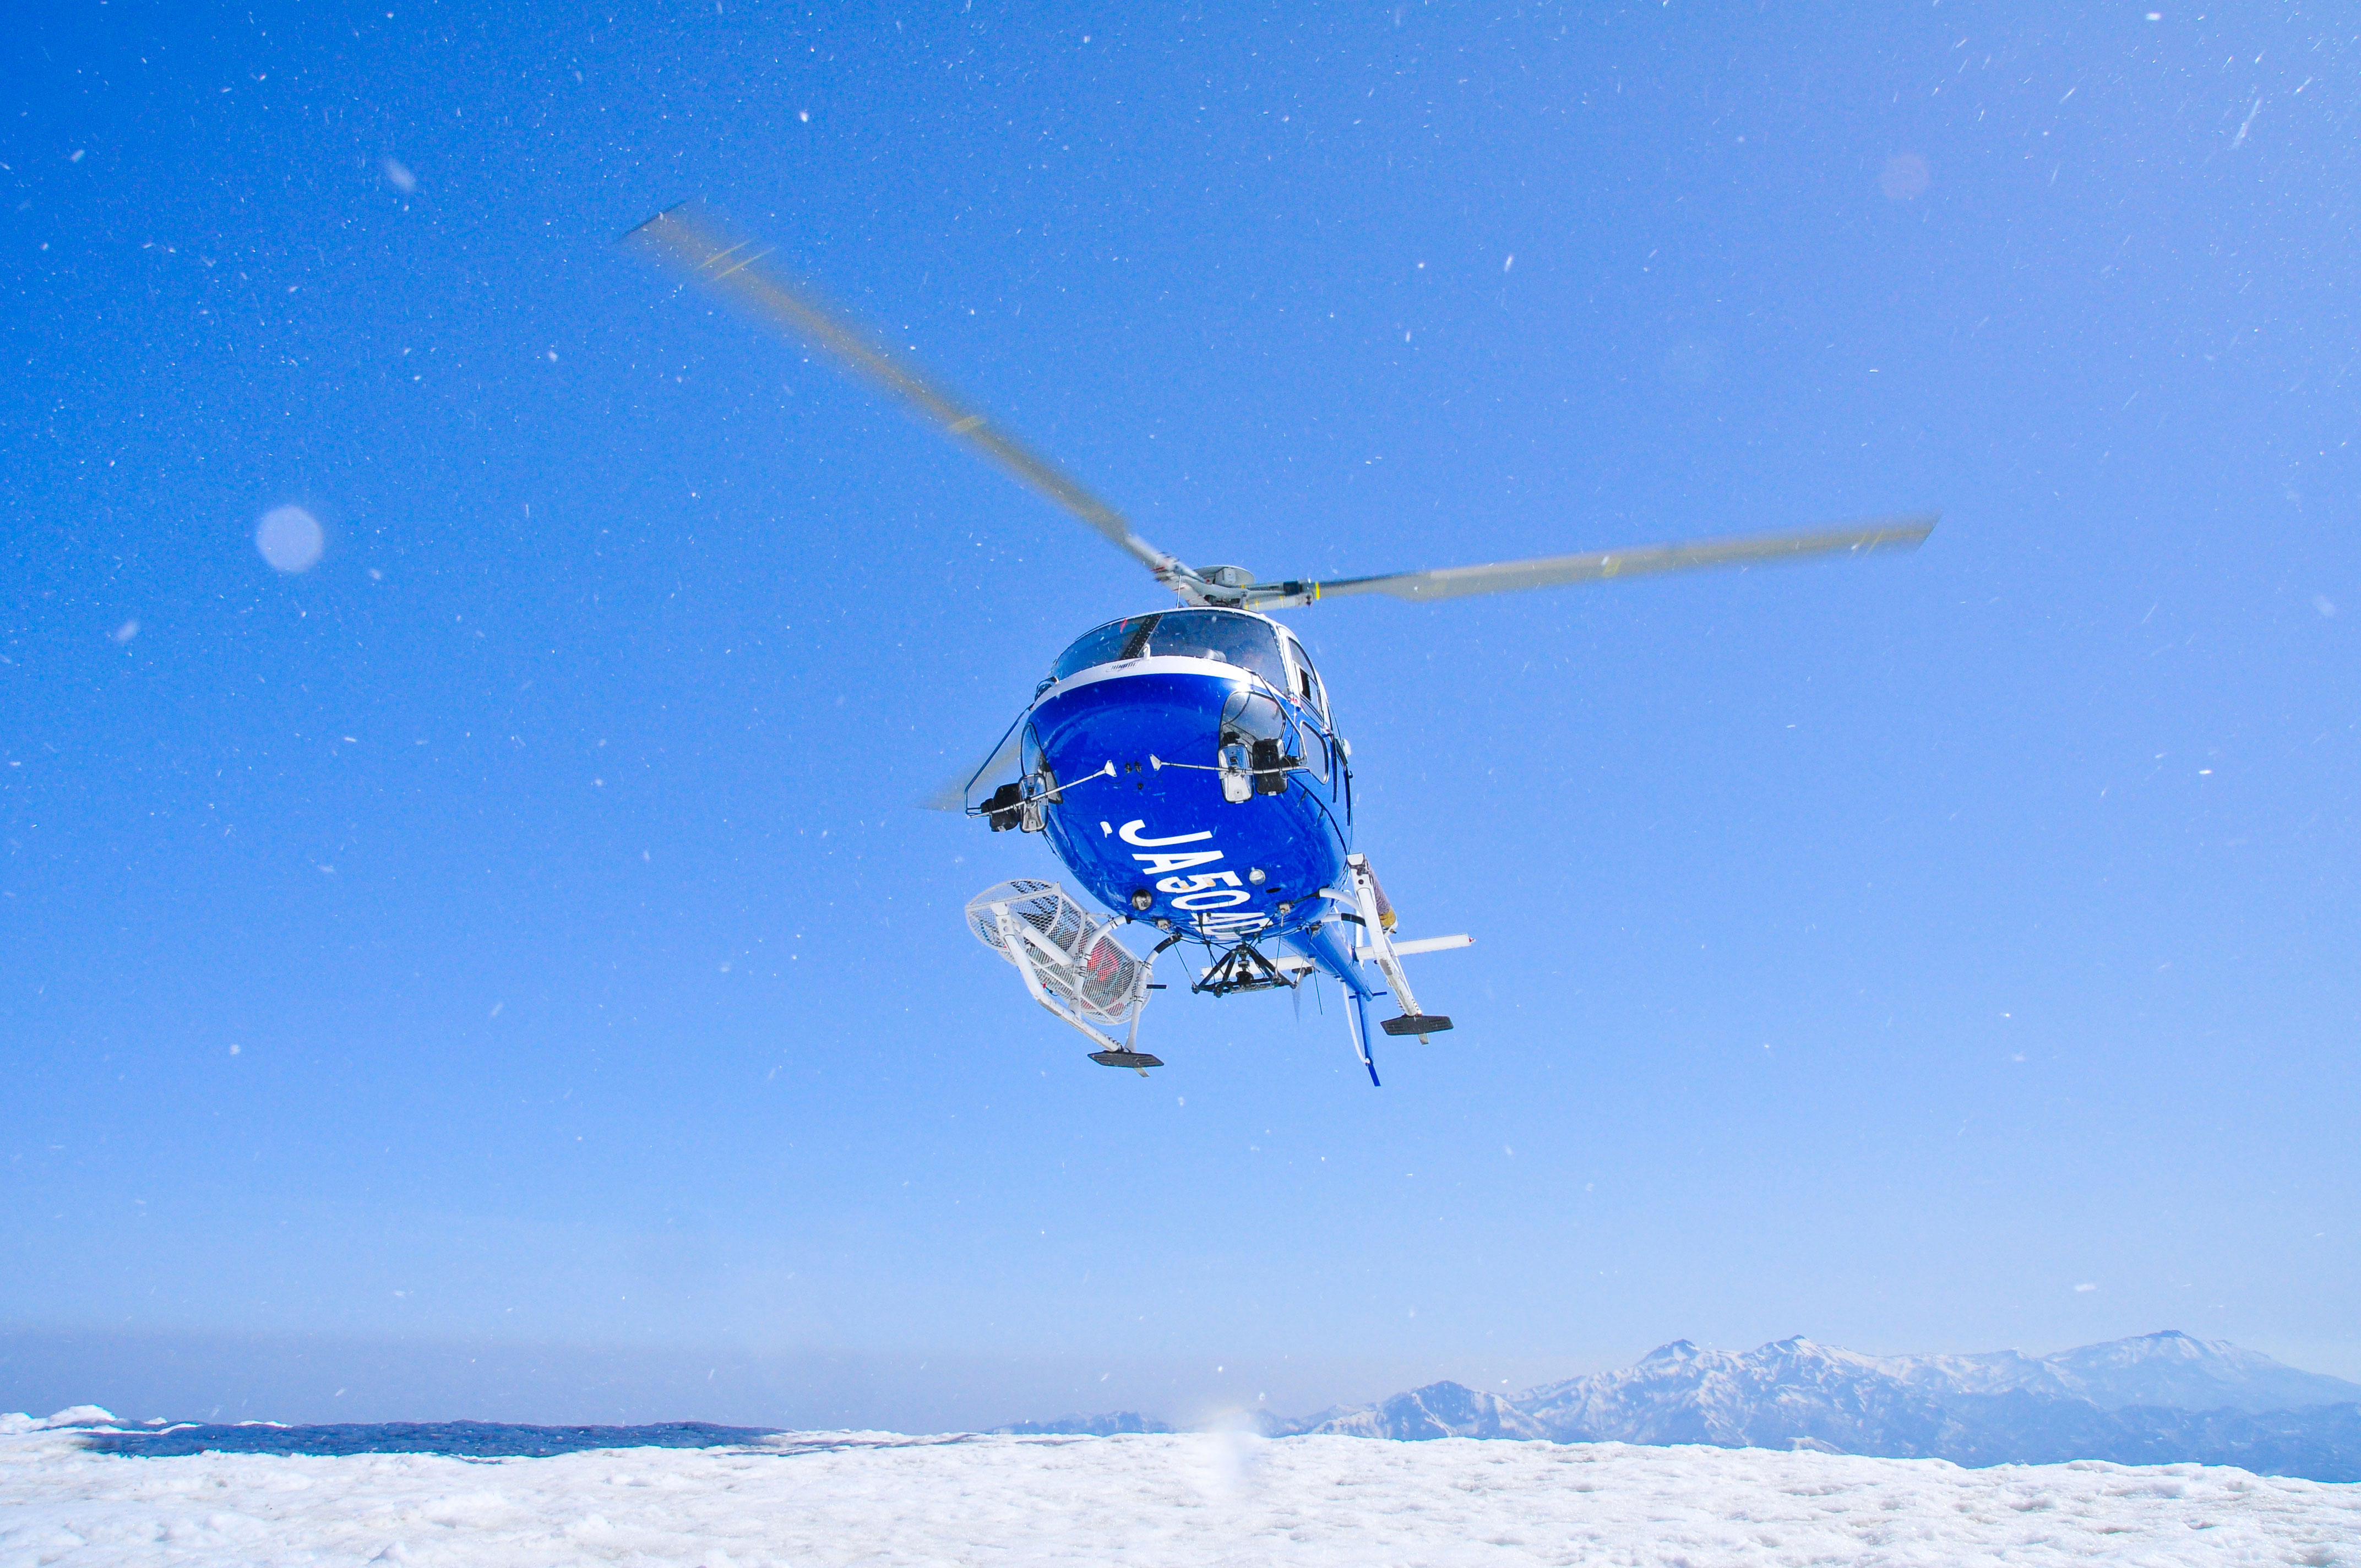 If you go up to an altitude of 2,200m with a helicopter at once, you will find a magnificent view! !!